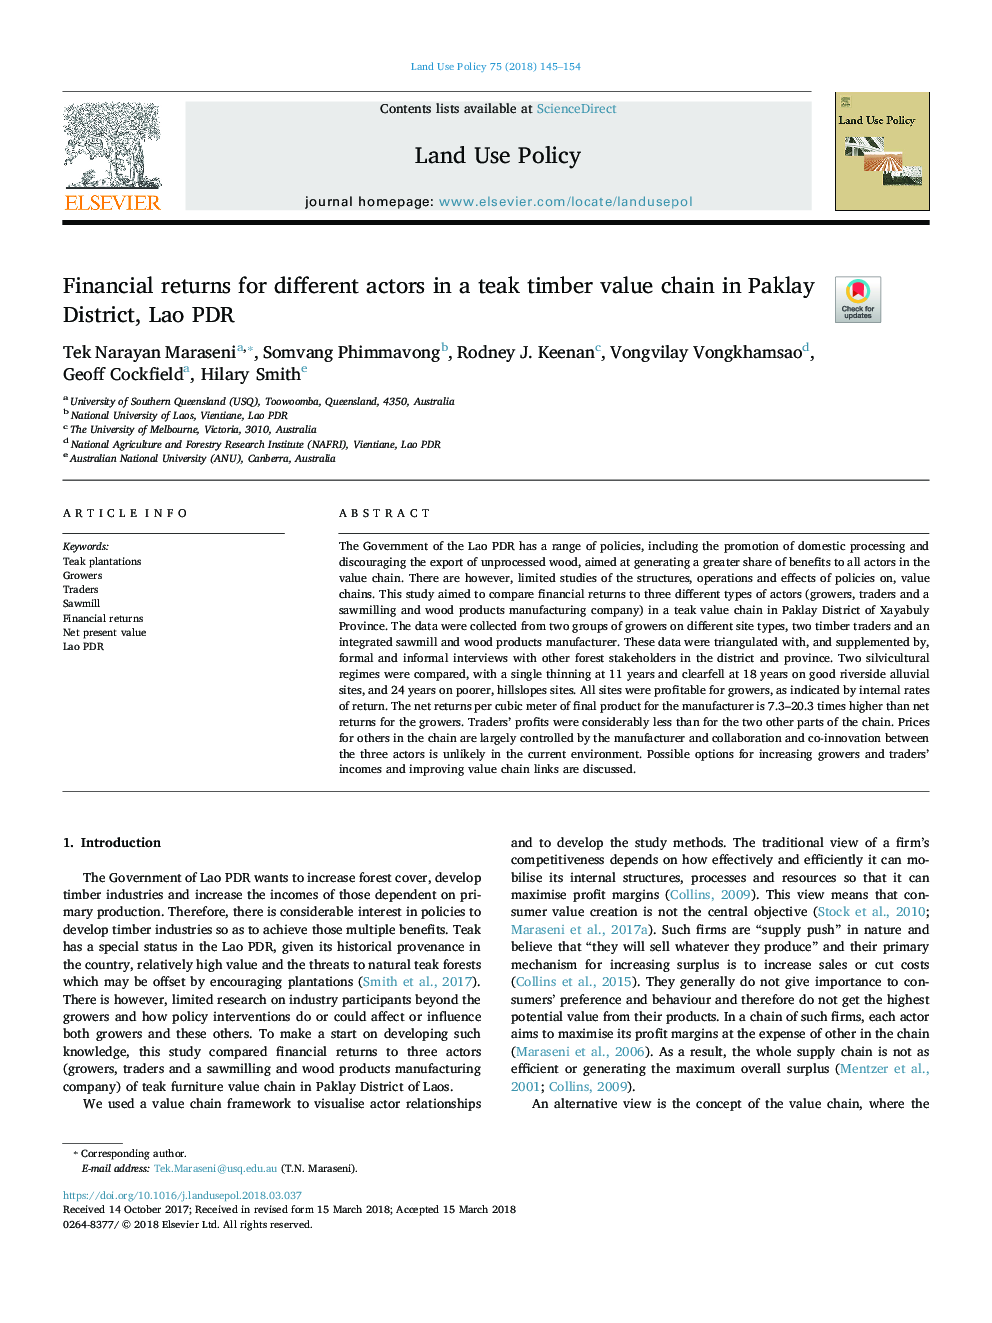 Financial returns for different actors in a teak timber value chain in Paklay District, Lao PDR